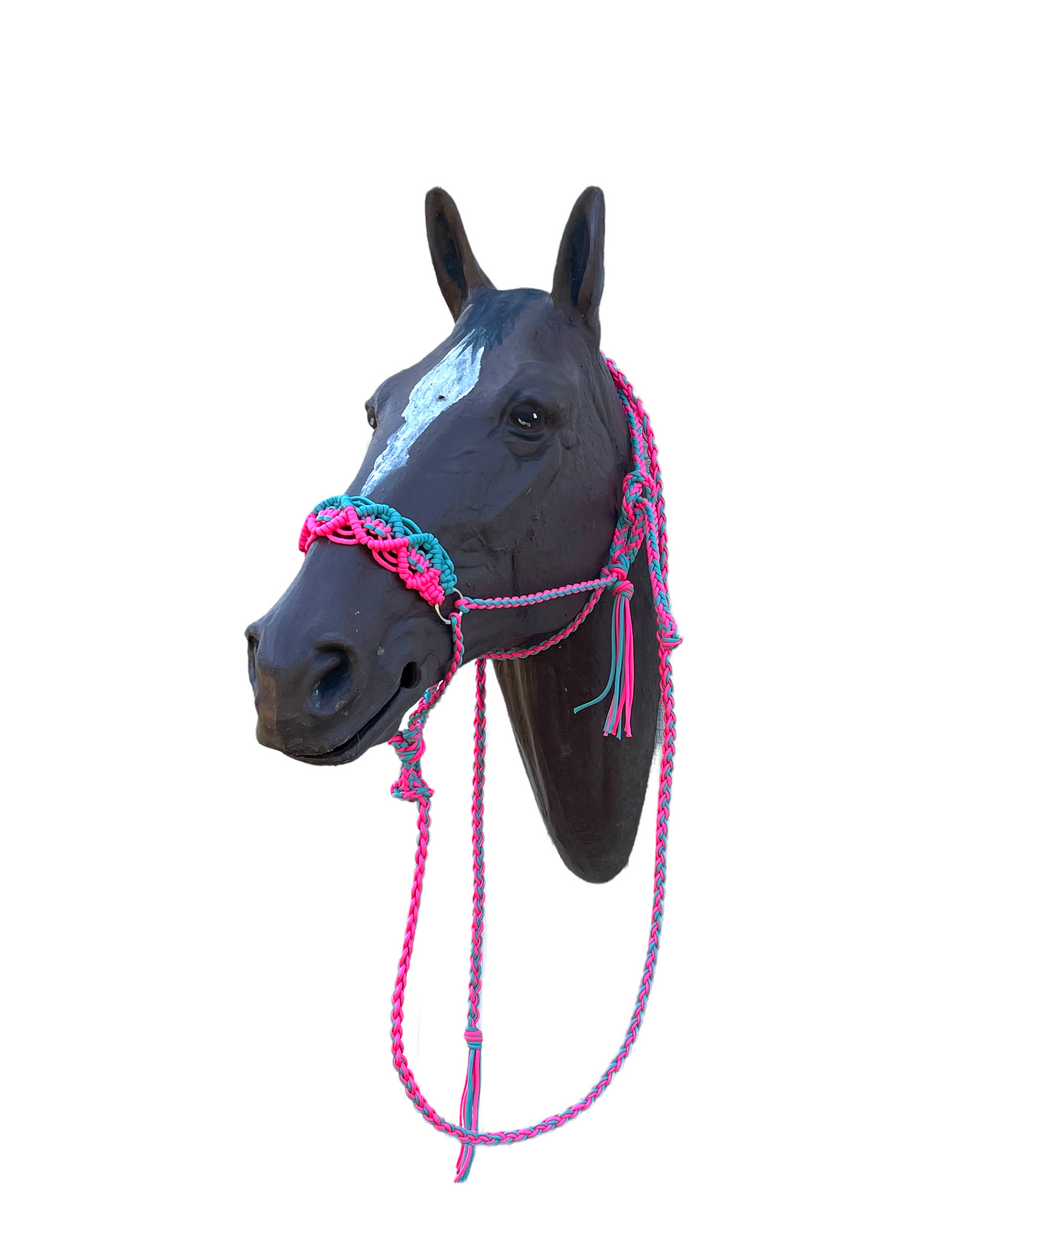 Braided horse halter with lead hot pink and light teal